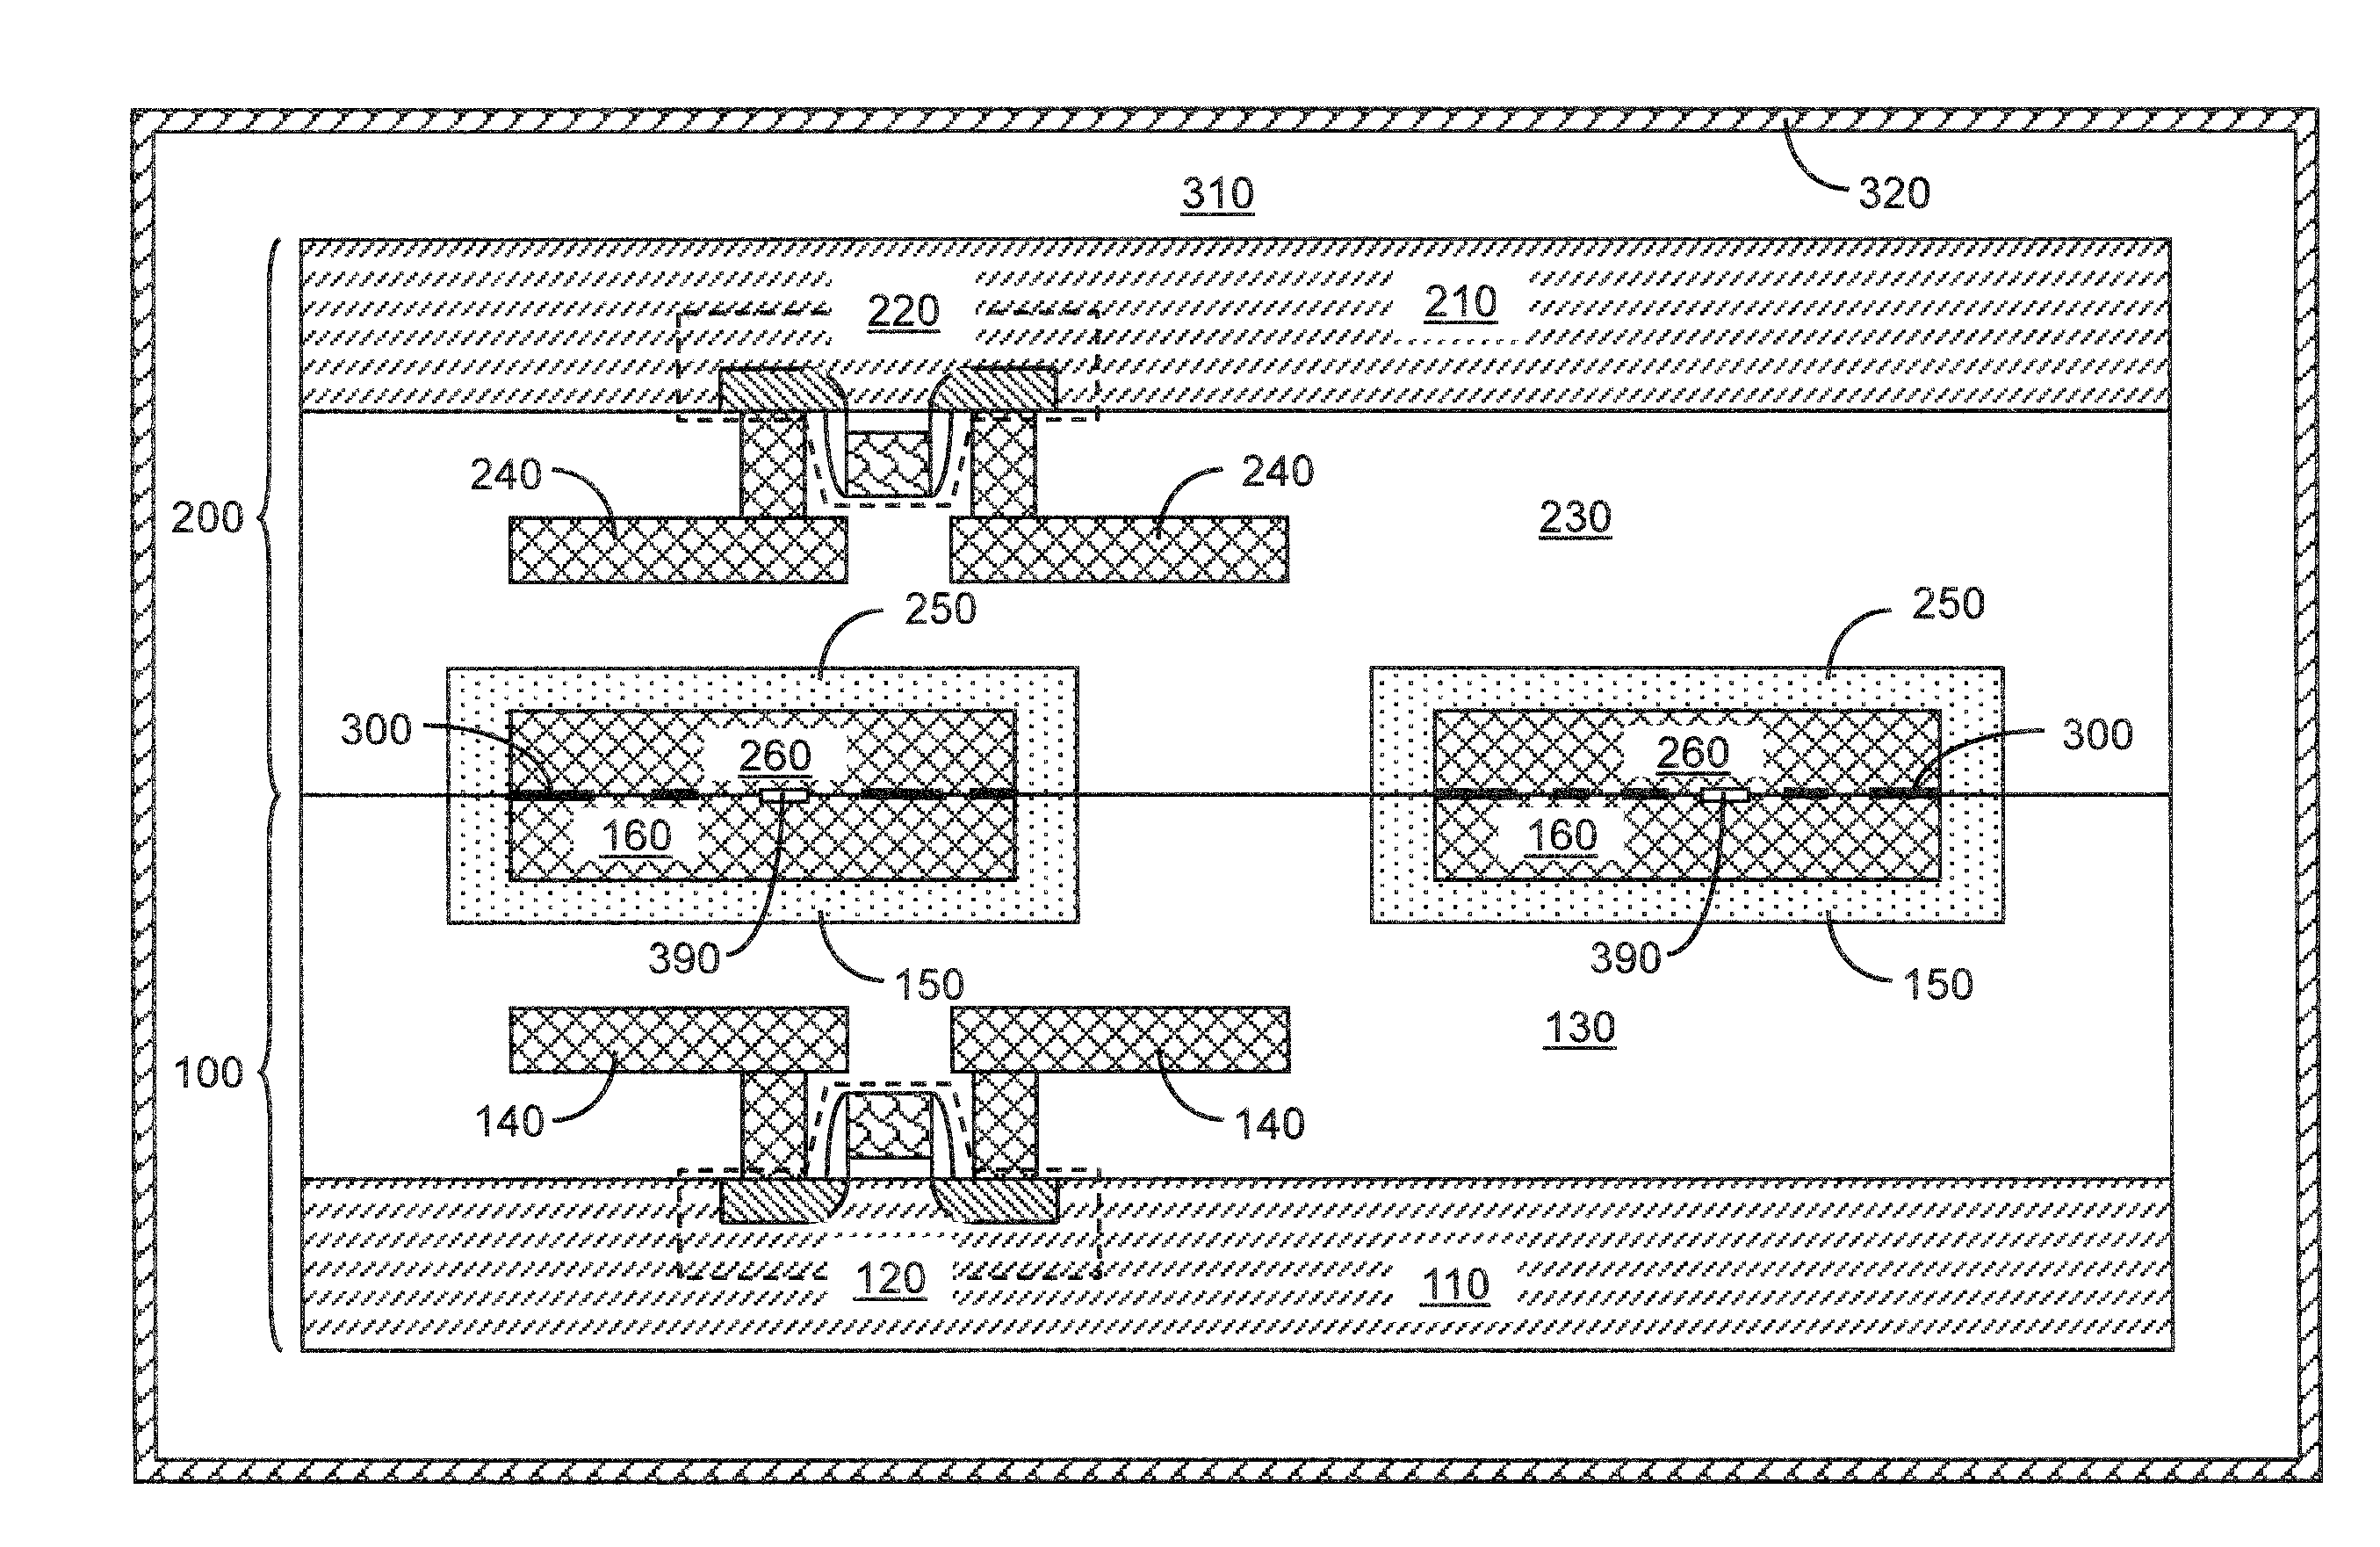 Pad bonding employing a self-aligned plated liner for adhesion enhancement